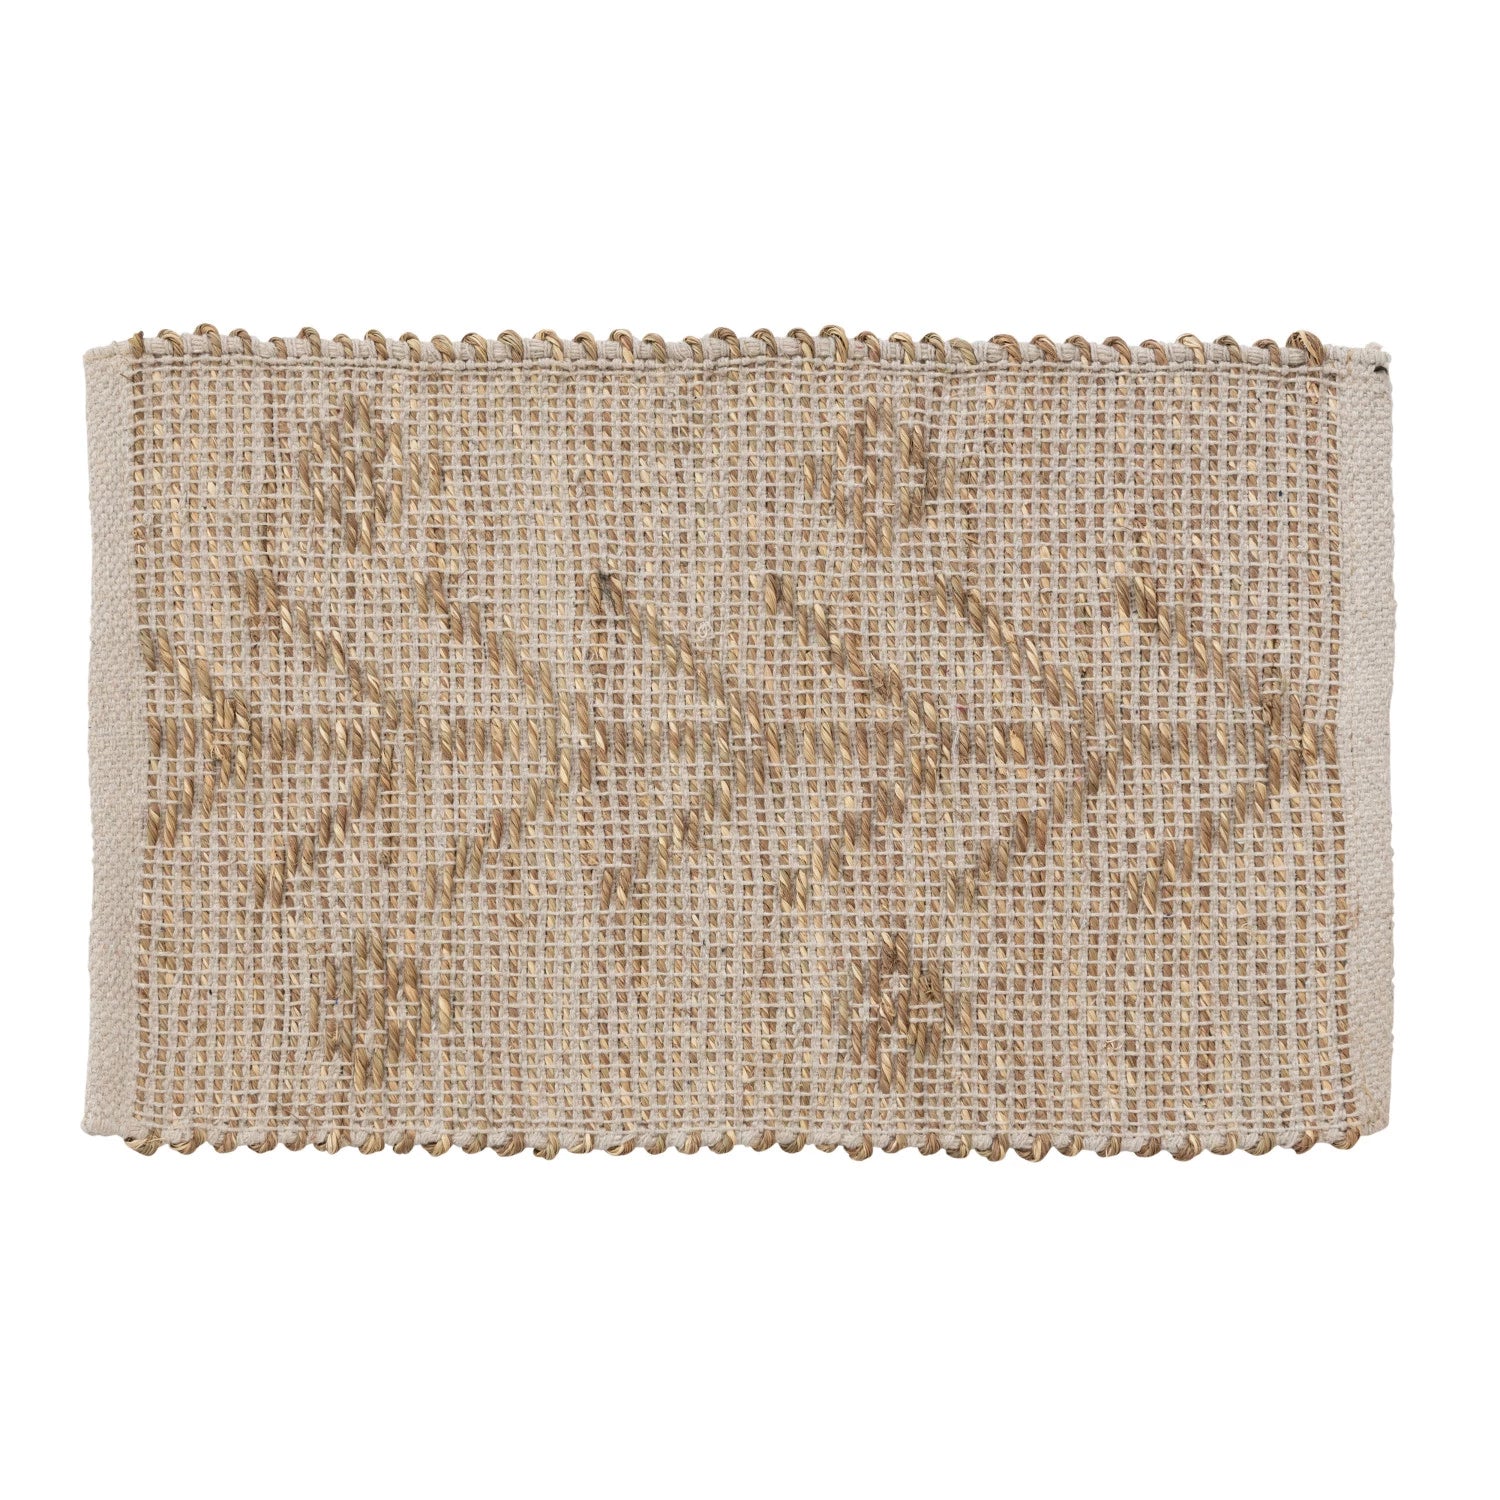 Two-Sided Hand-Woven Seagrass & Cotton Placemat w/ Design